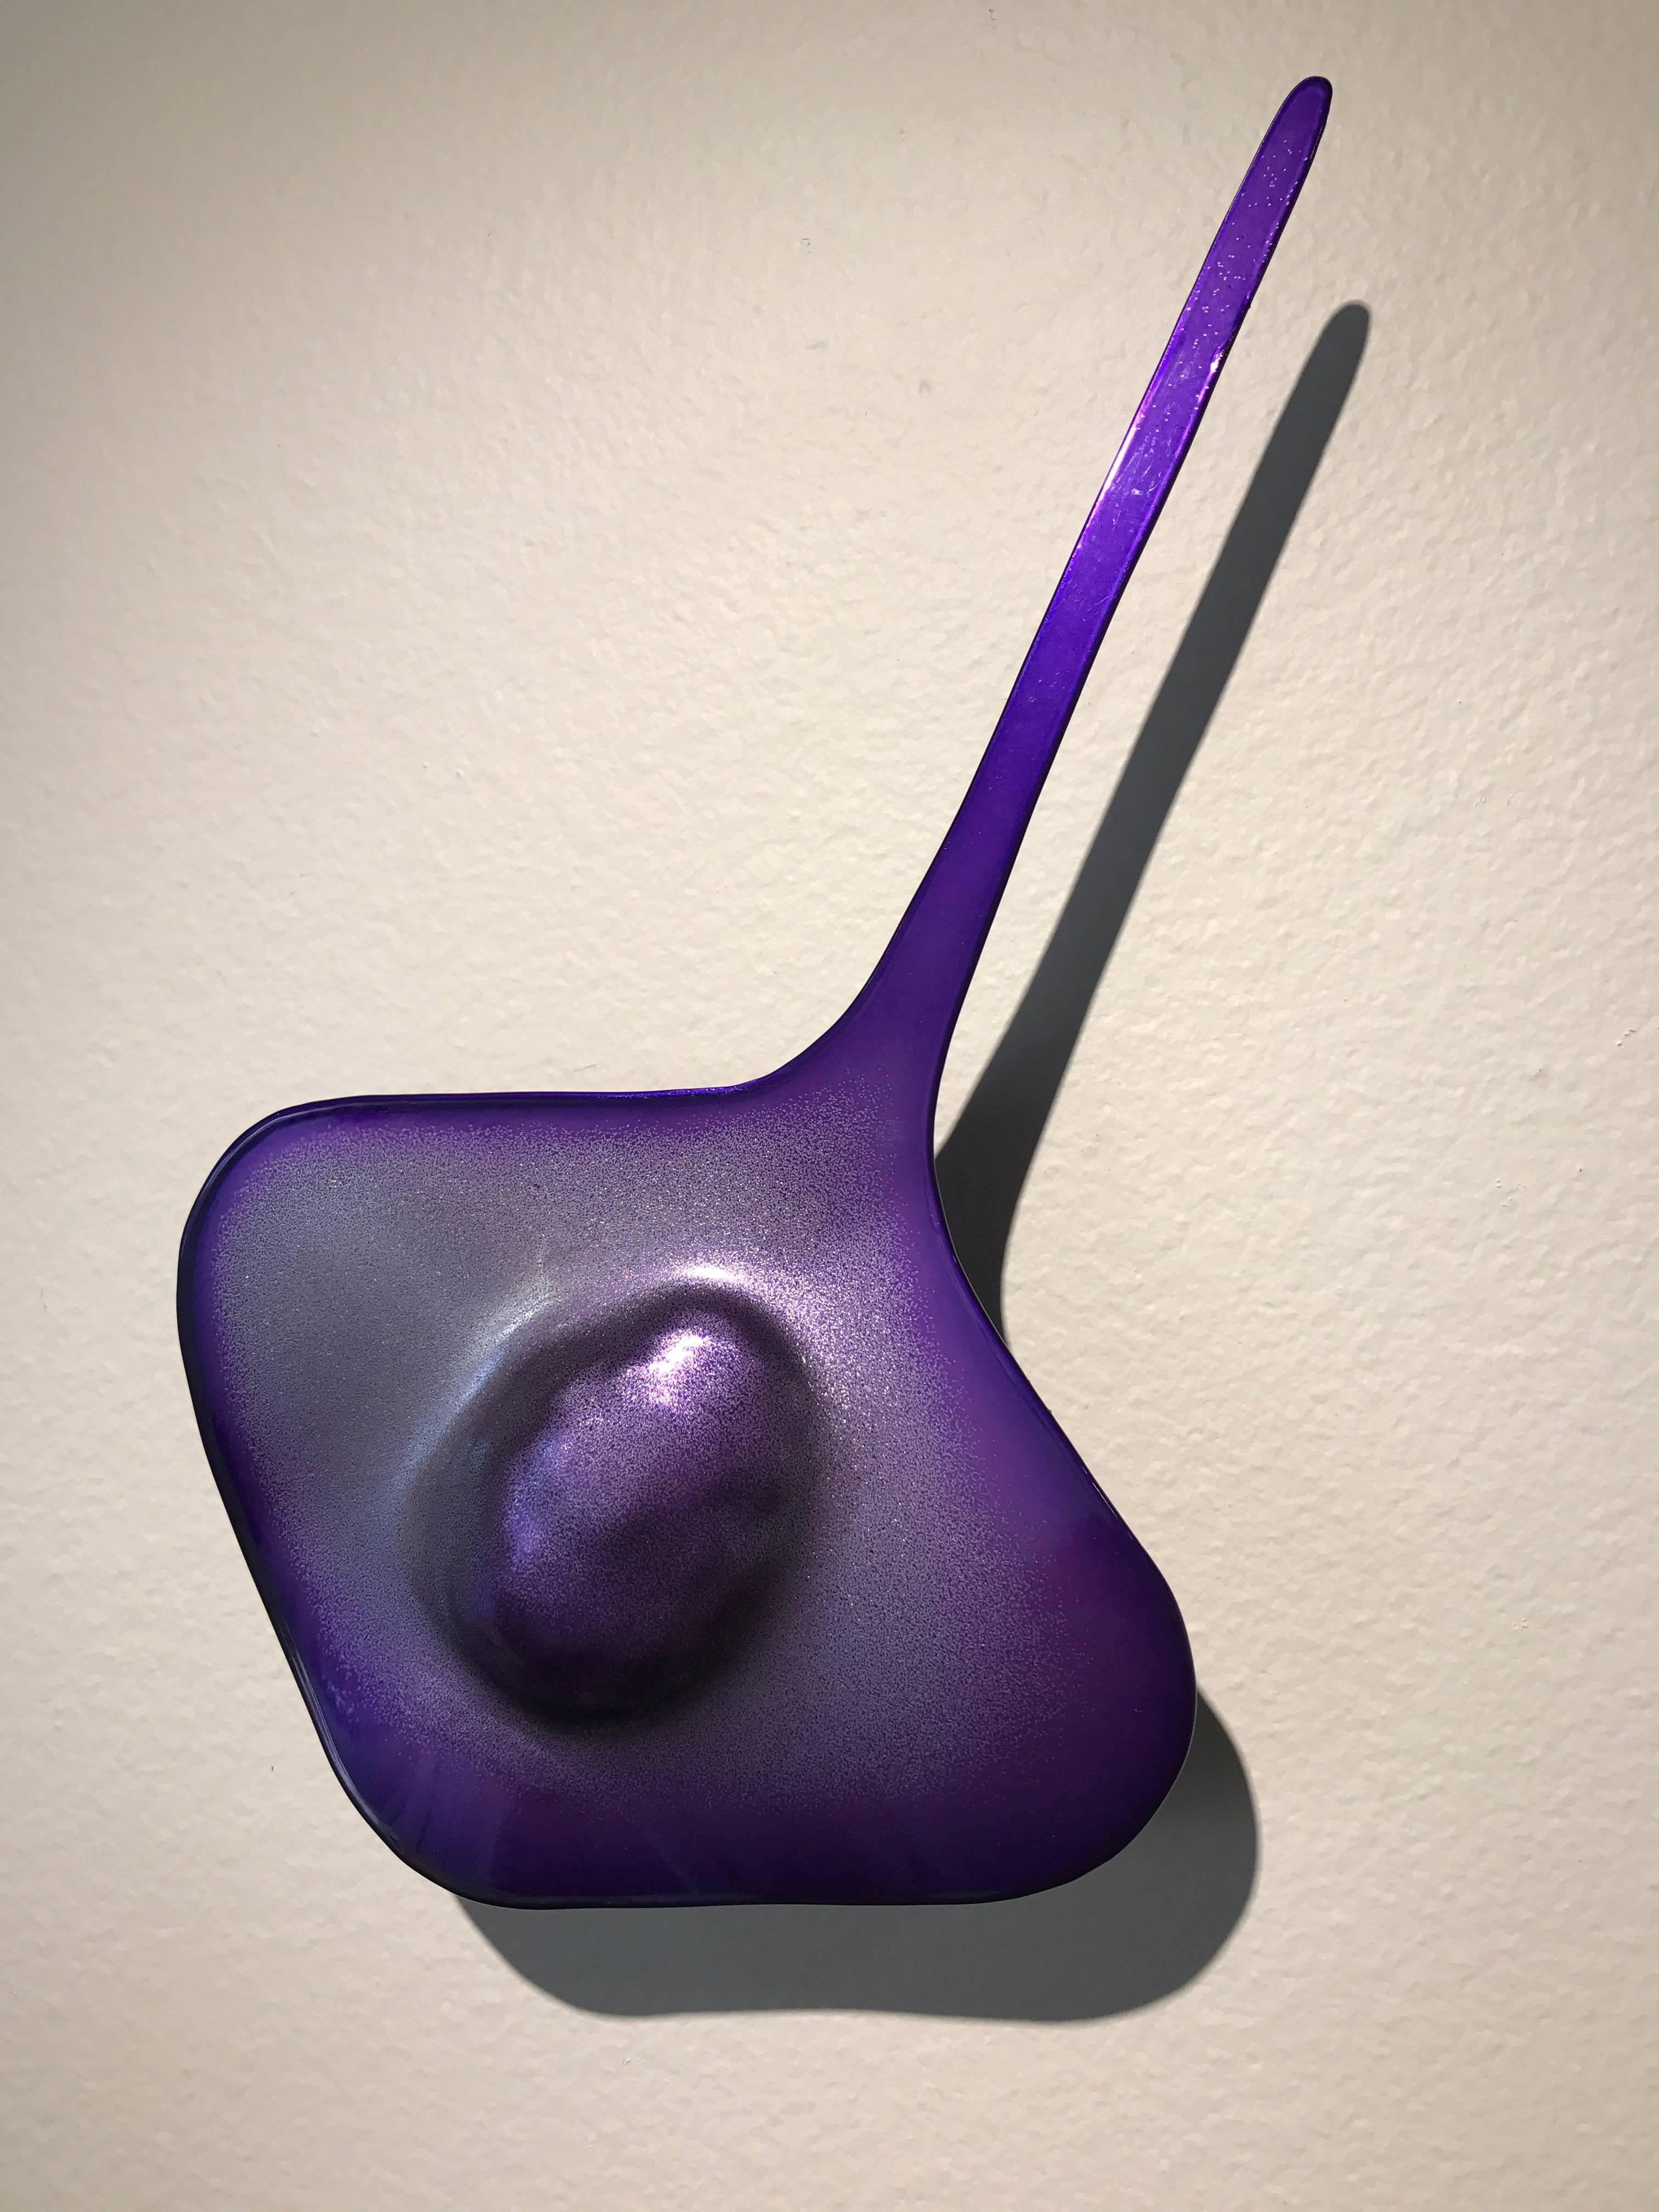 Hand forged wall sculpture by Laura Walters Abrams. Additional stingrays are available to use as an installation. Each sculpture is signed and powder coated.

Laura Walters Abrams has been making sculpture since the early 1990’s. Her success is due